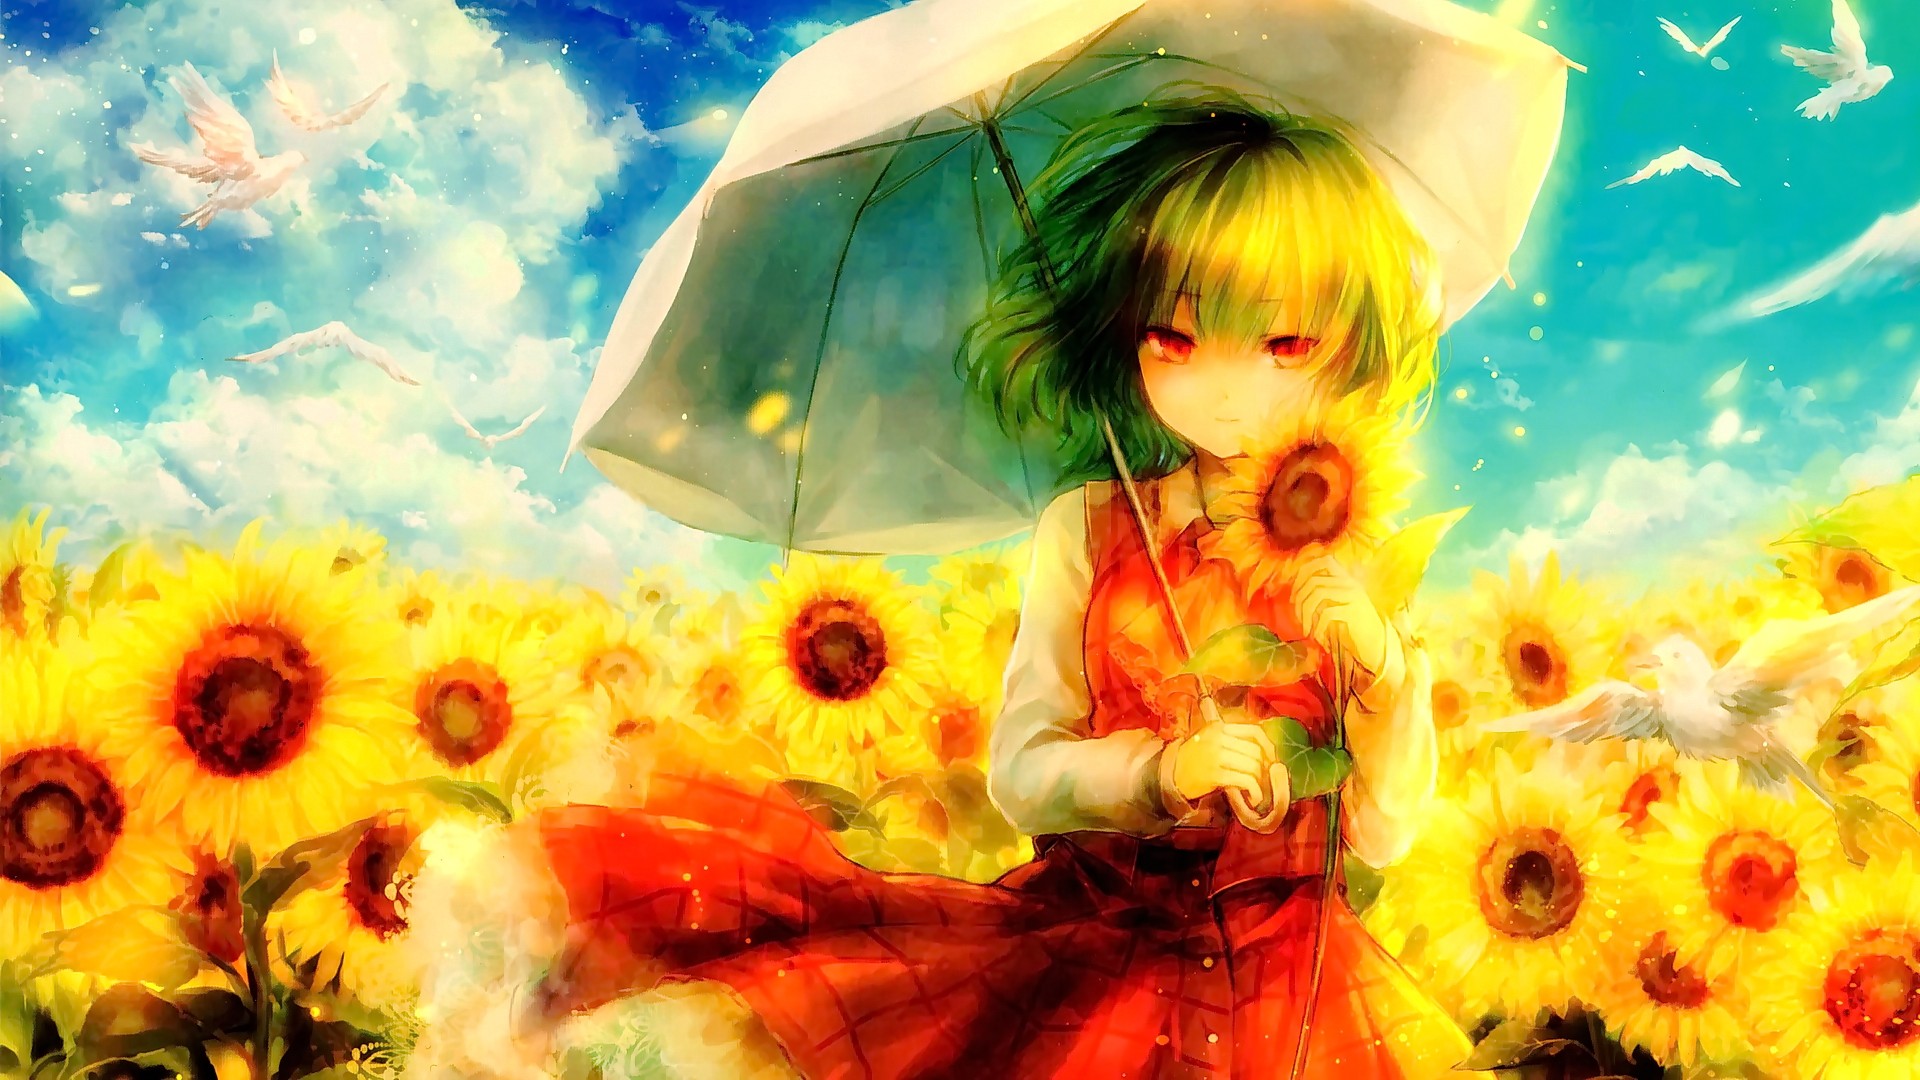 Anime Anime Girls Short Hair Red Eyes Sunflowers Umbrella Sky Clouds Birds Looking At Viewer Touhou  1920x1080